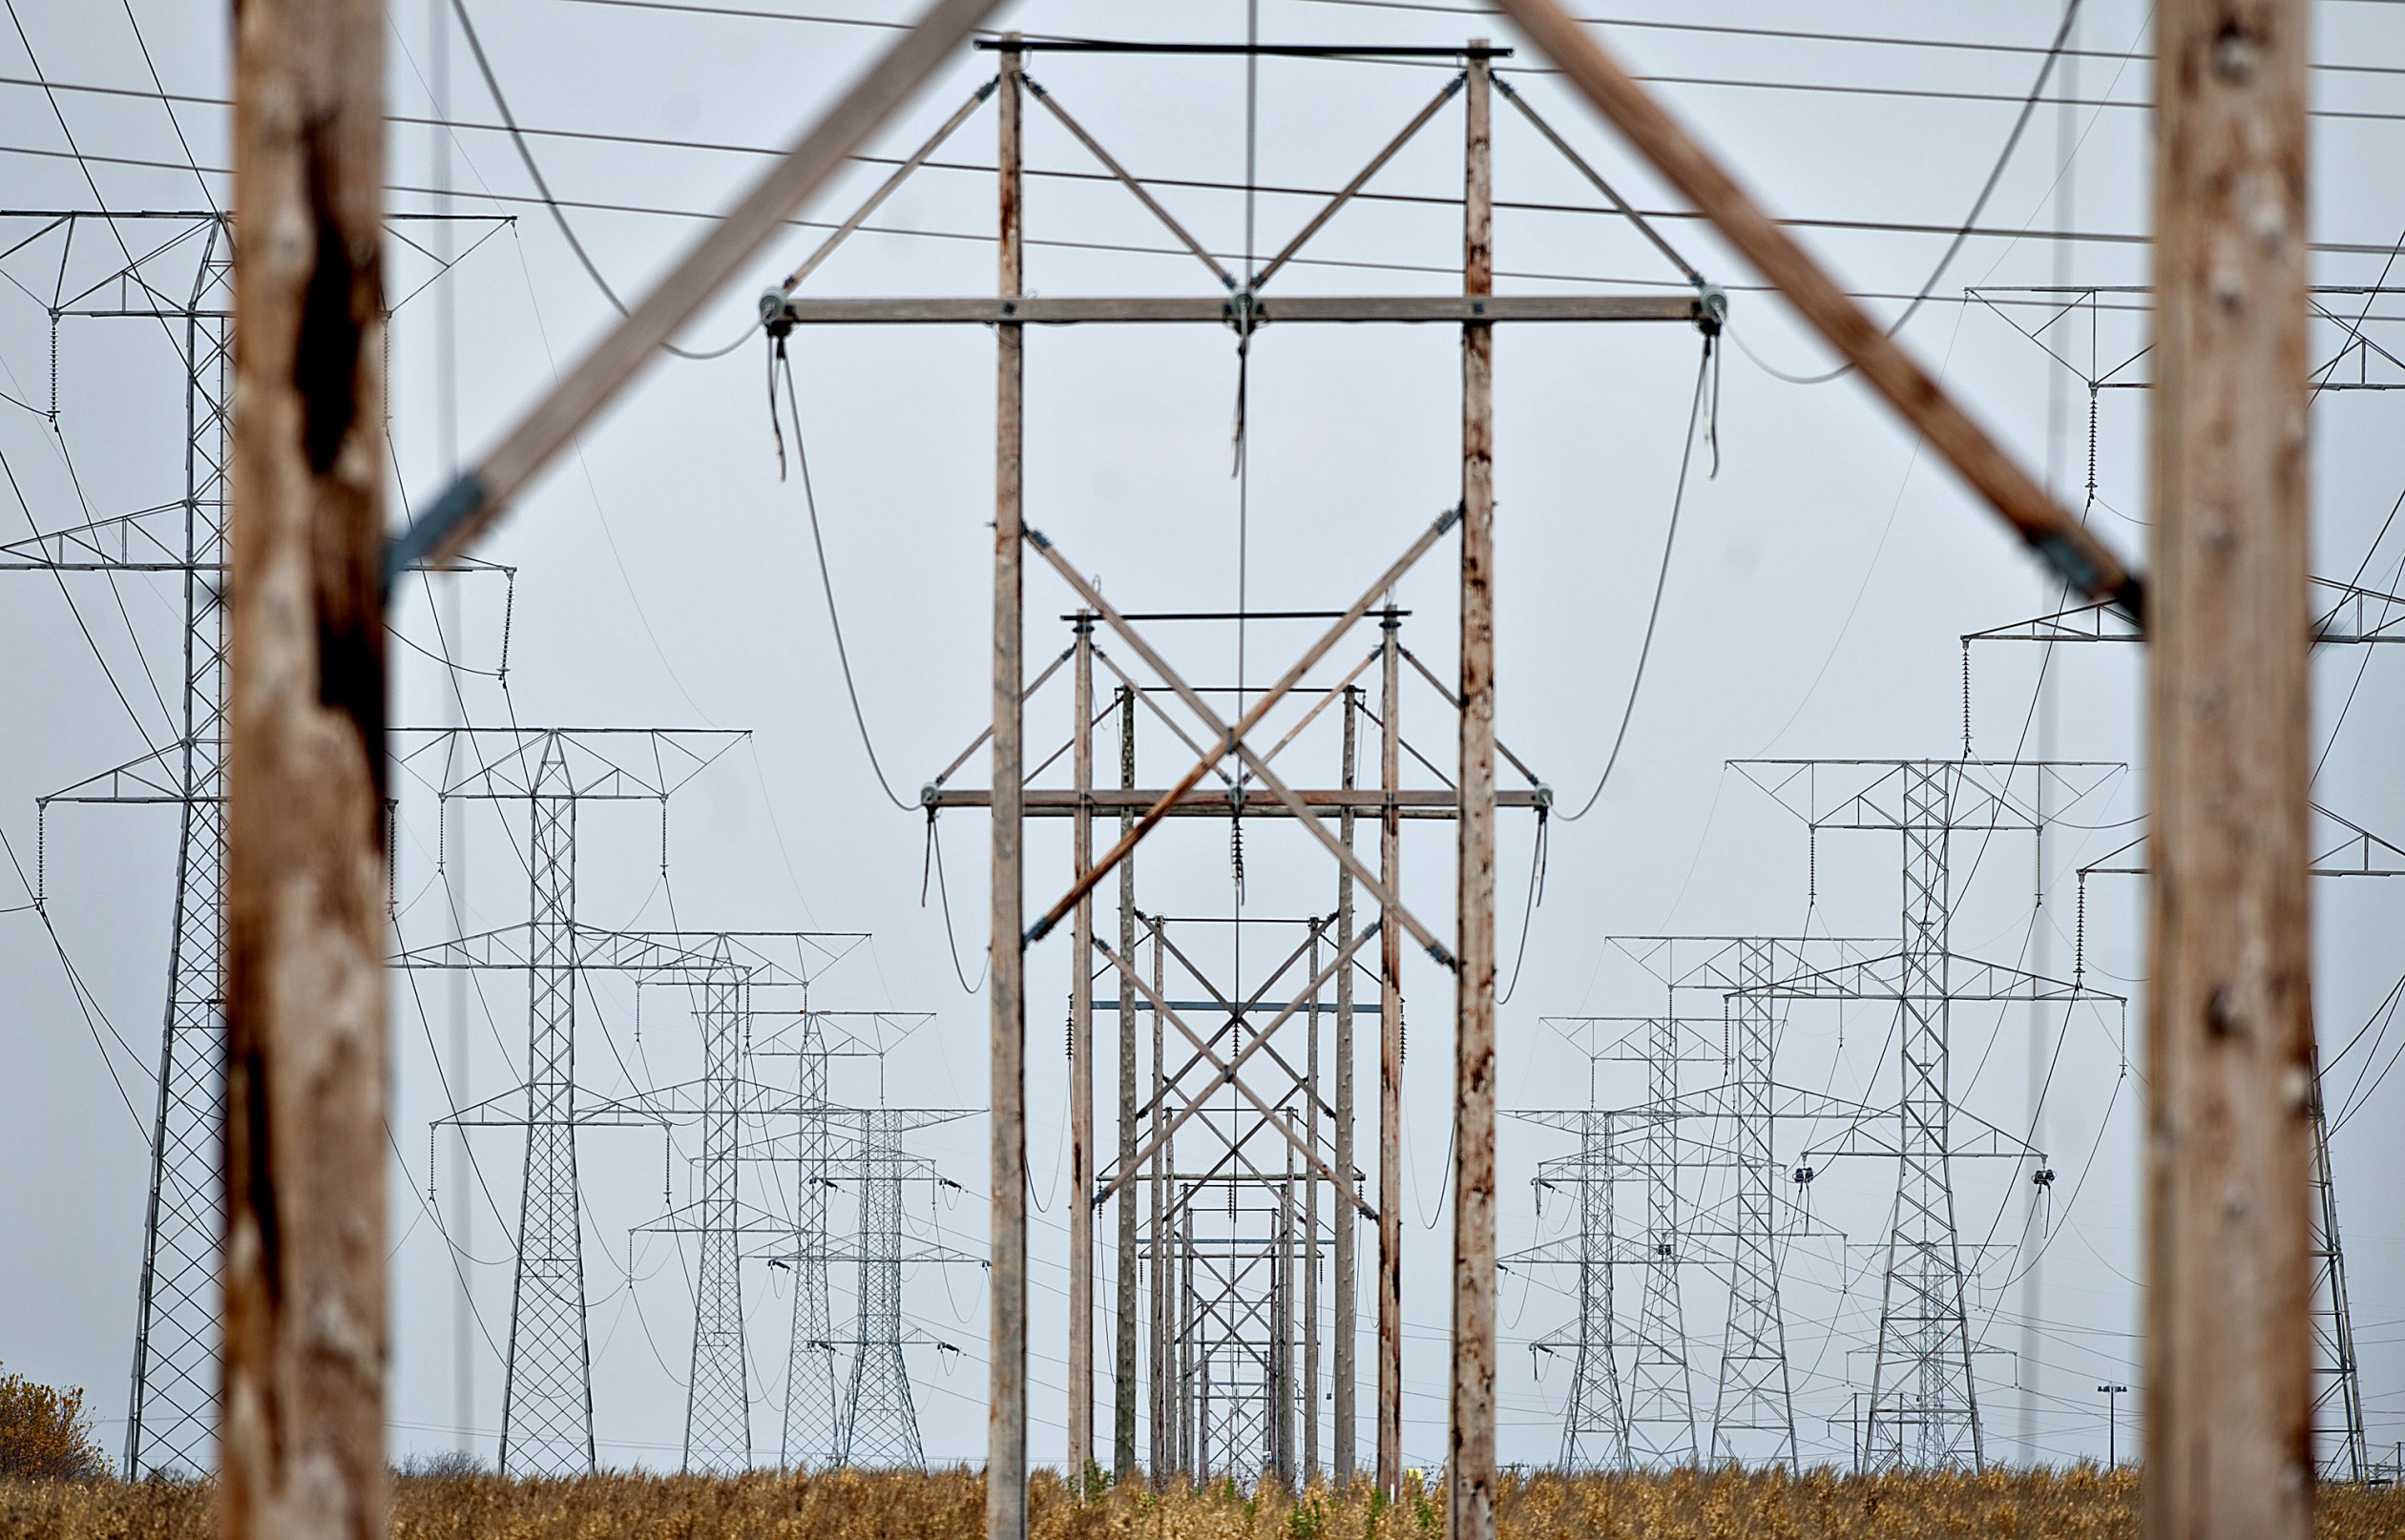 Can America’s Grid Survive an Electromagnetic Attack?